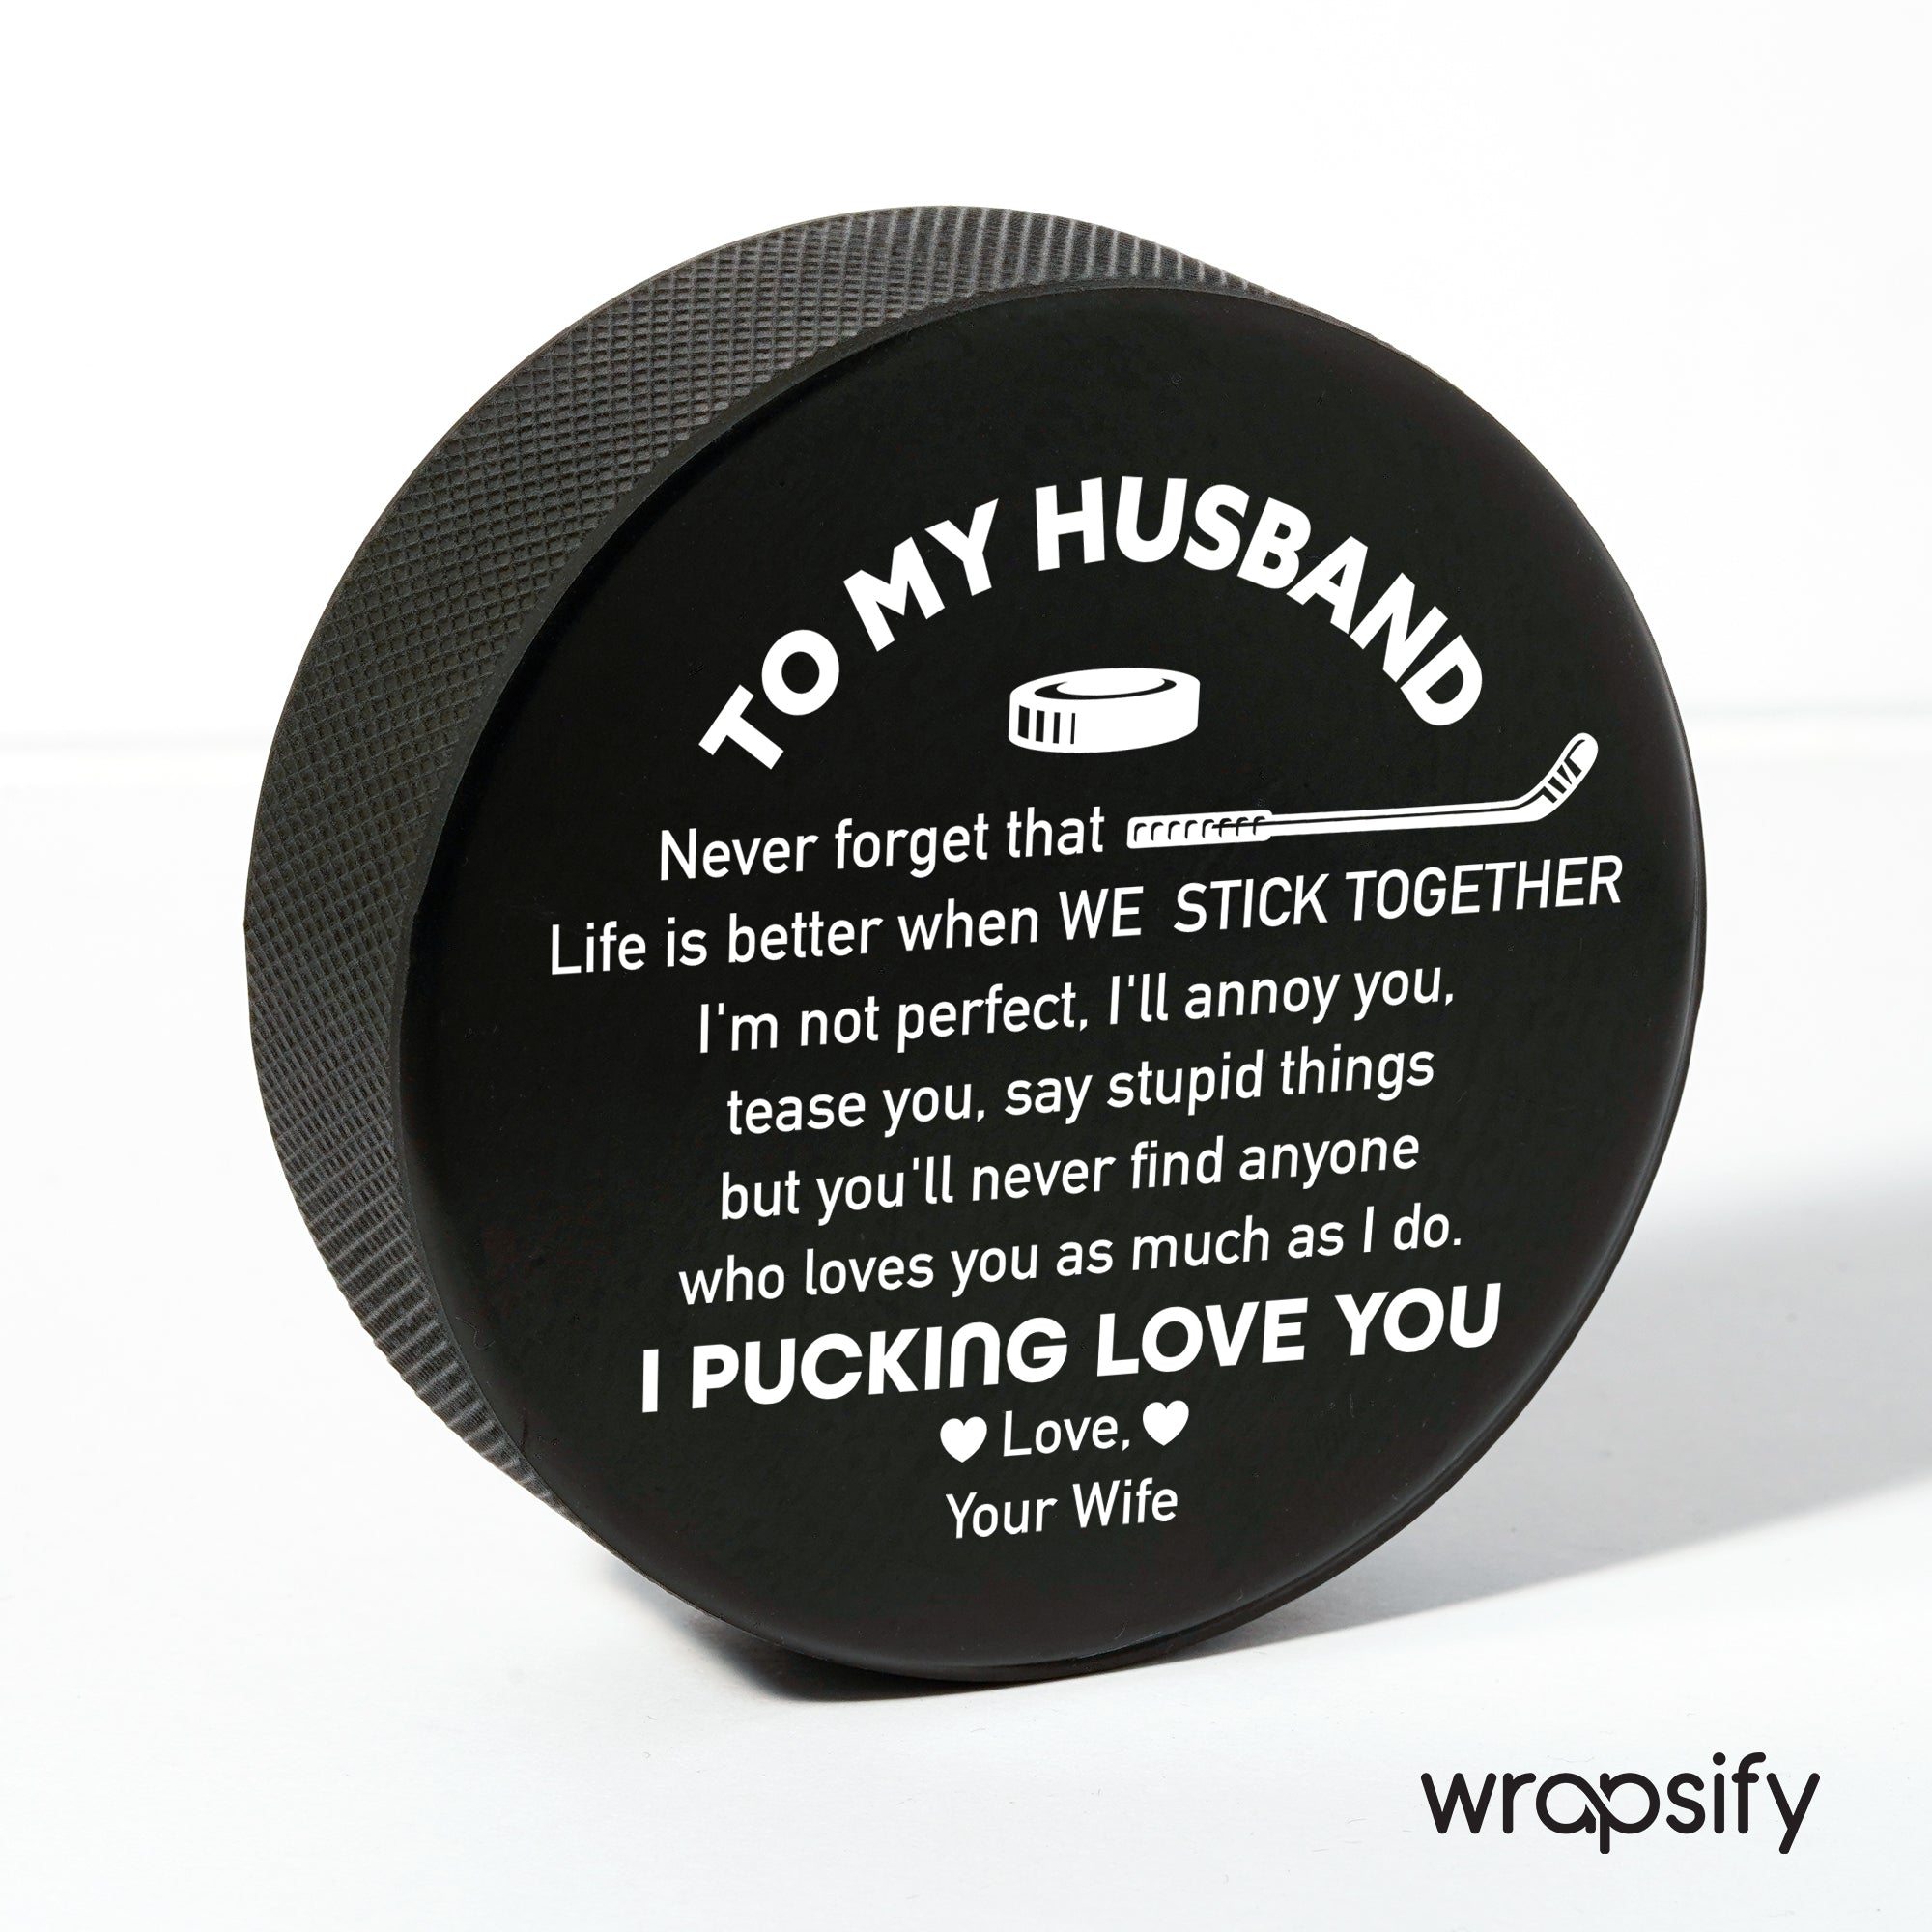 Hockey Puck - Hockey - To My Husband - Life Is Better When We Stick Together - Gai14002